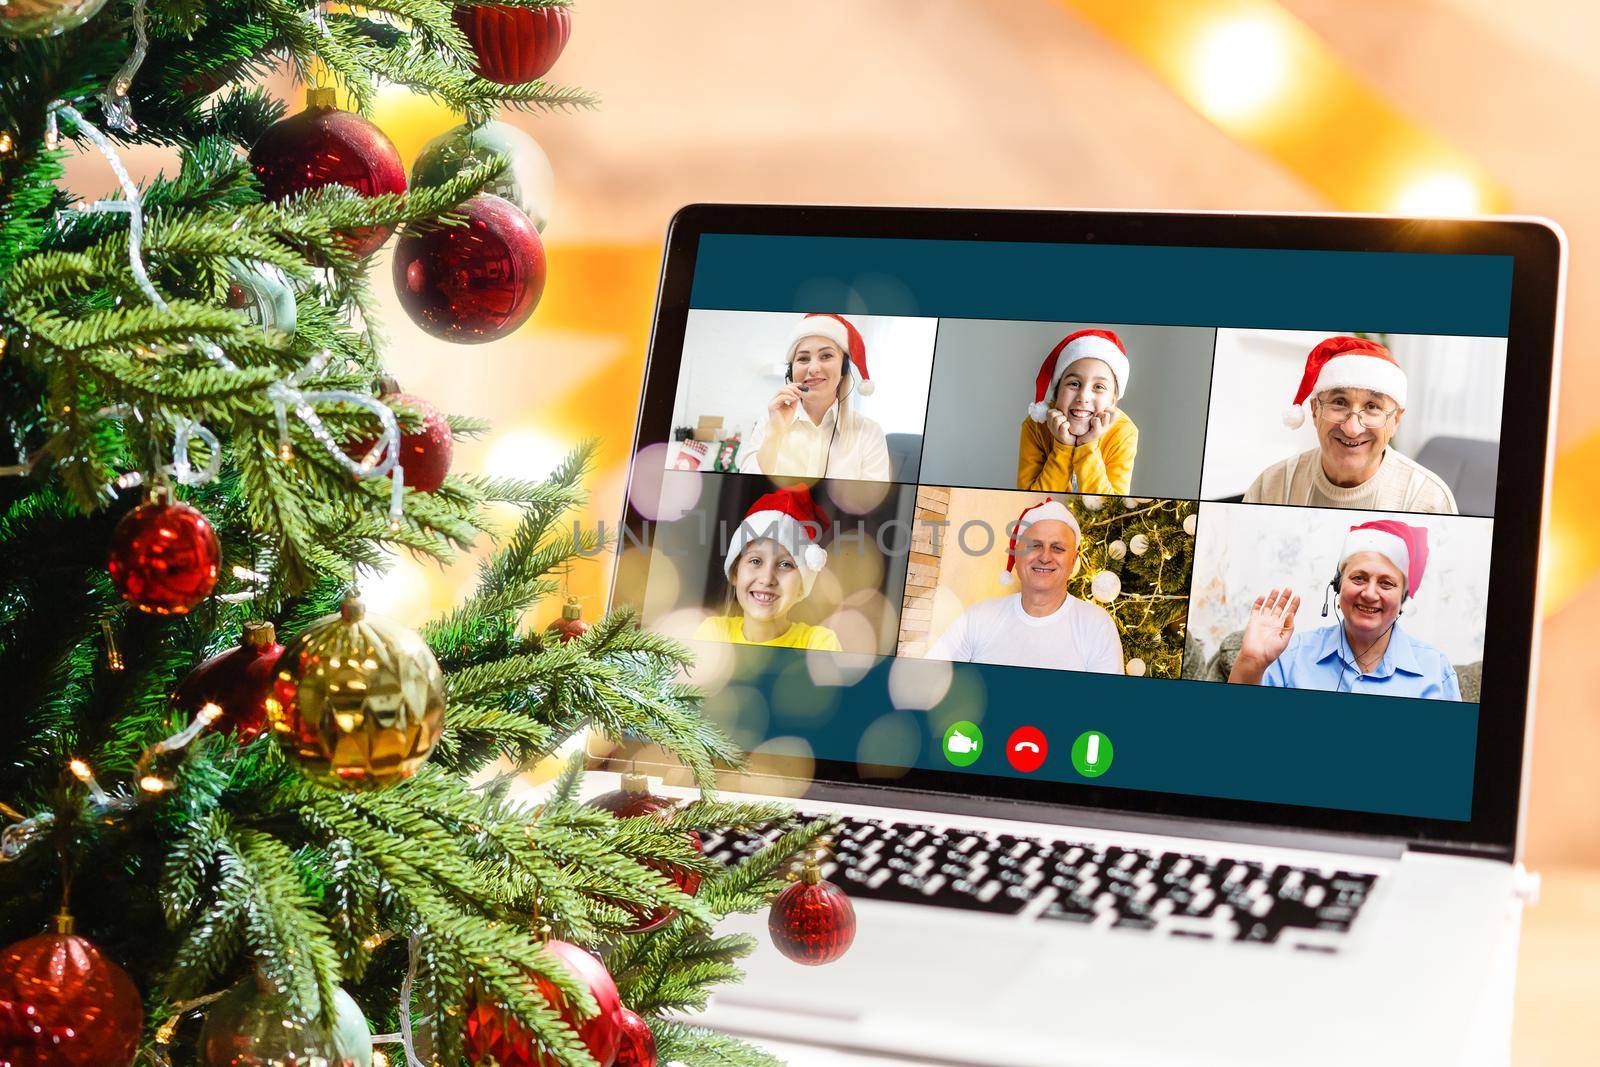 Christmas greetings online. a woman in a white sweater and red Santa hat uses a laptop to make video calls to friends, parents, and for online shopping by Andelov13